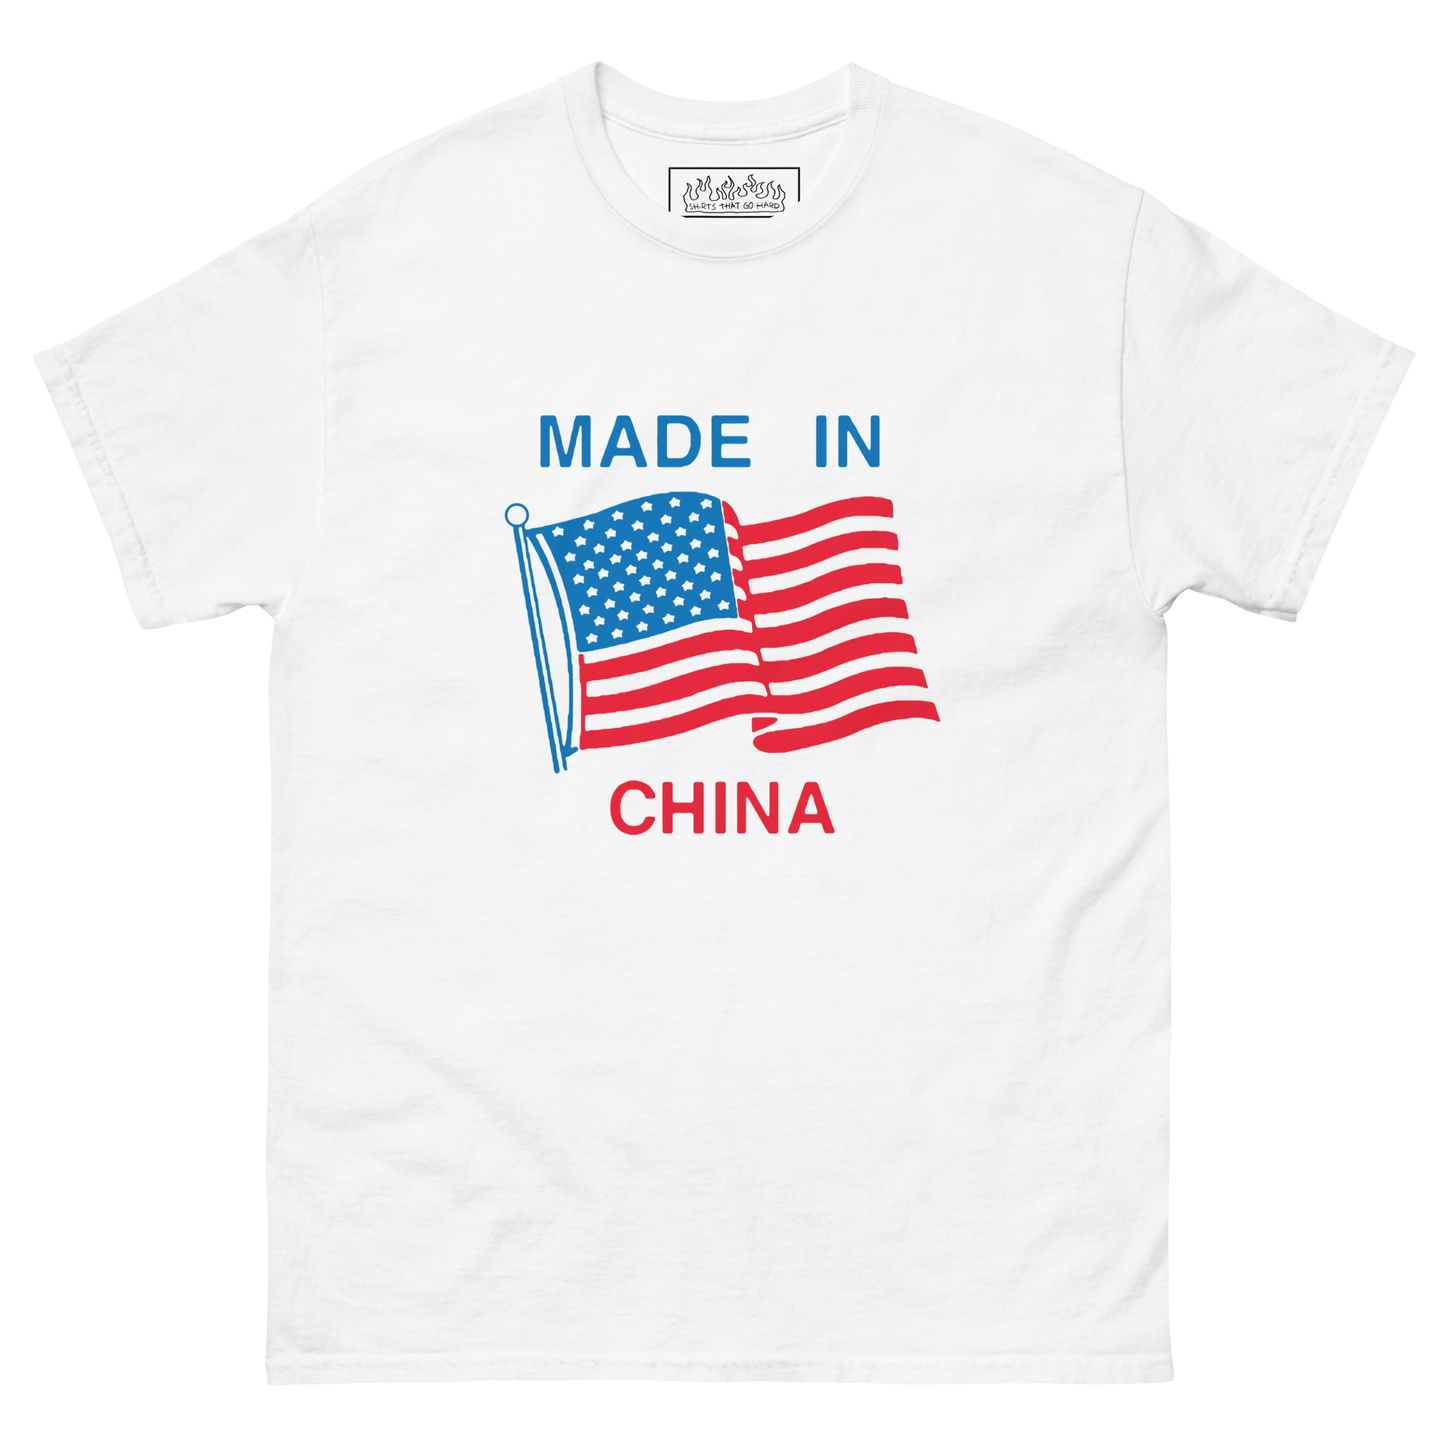 Made In China.